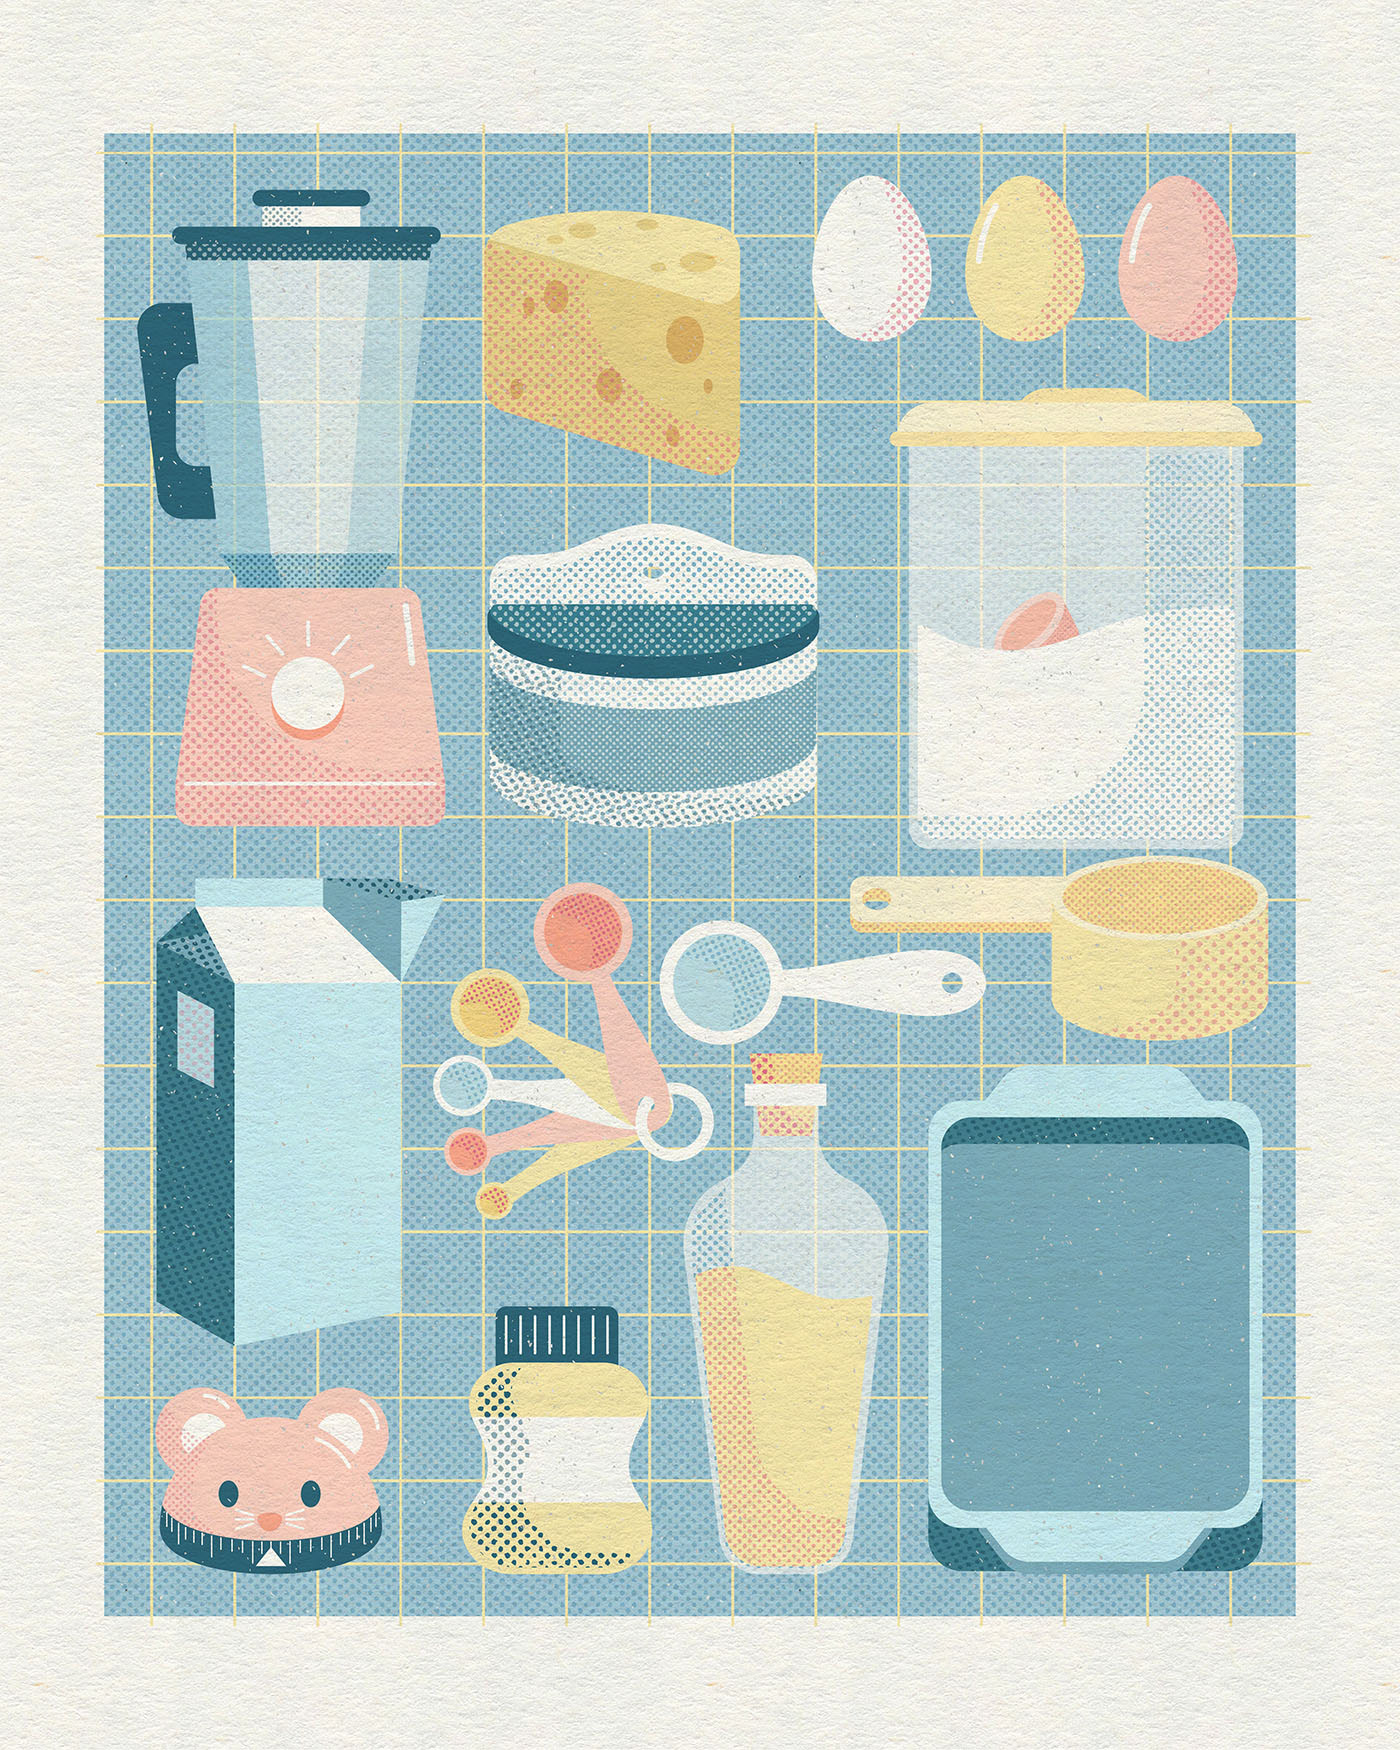 Illustrated cheese, eggs and kitchen appliances and utensils 